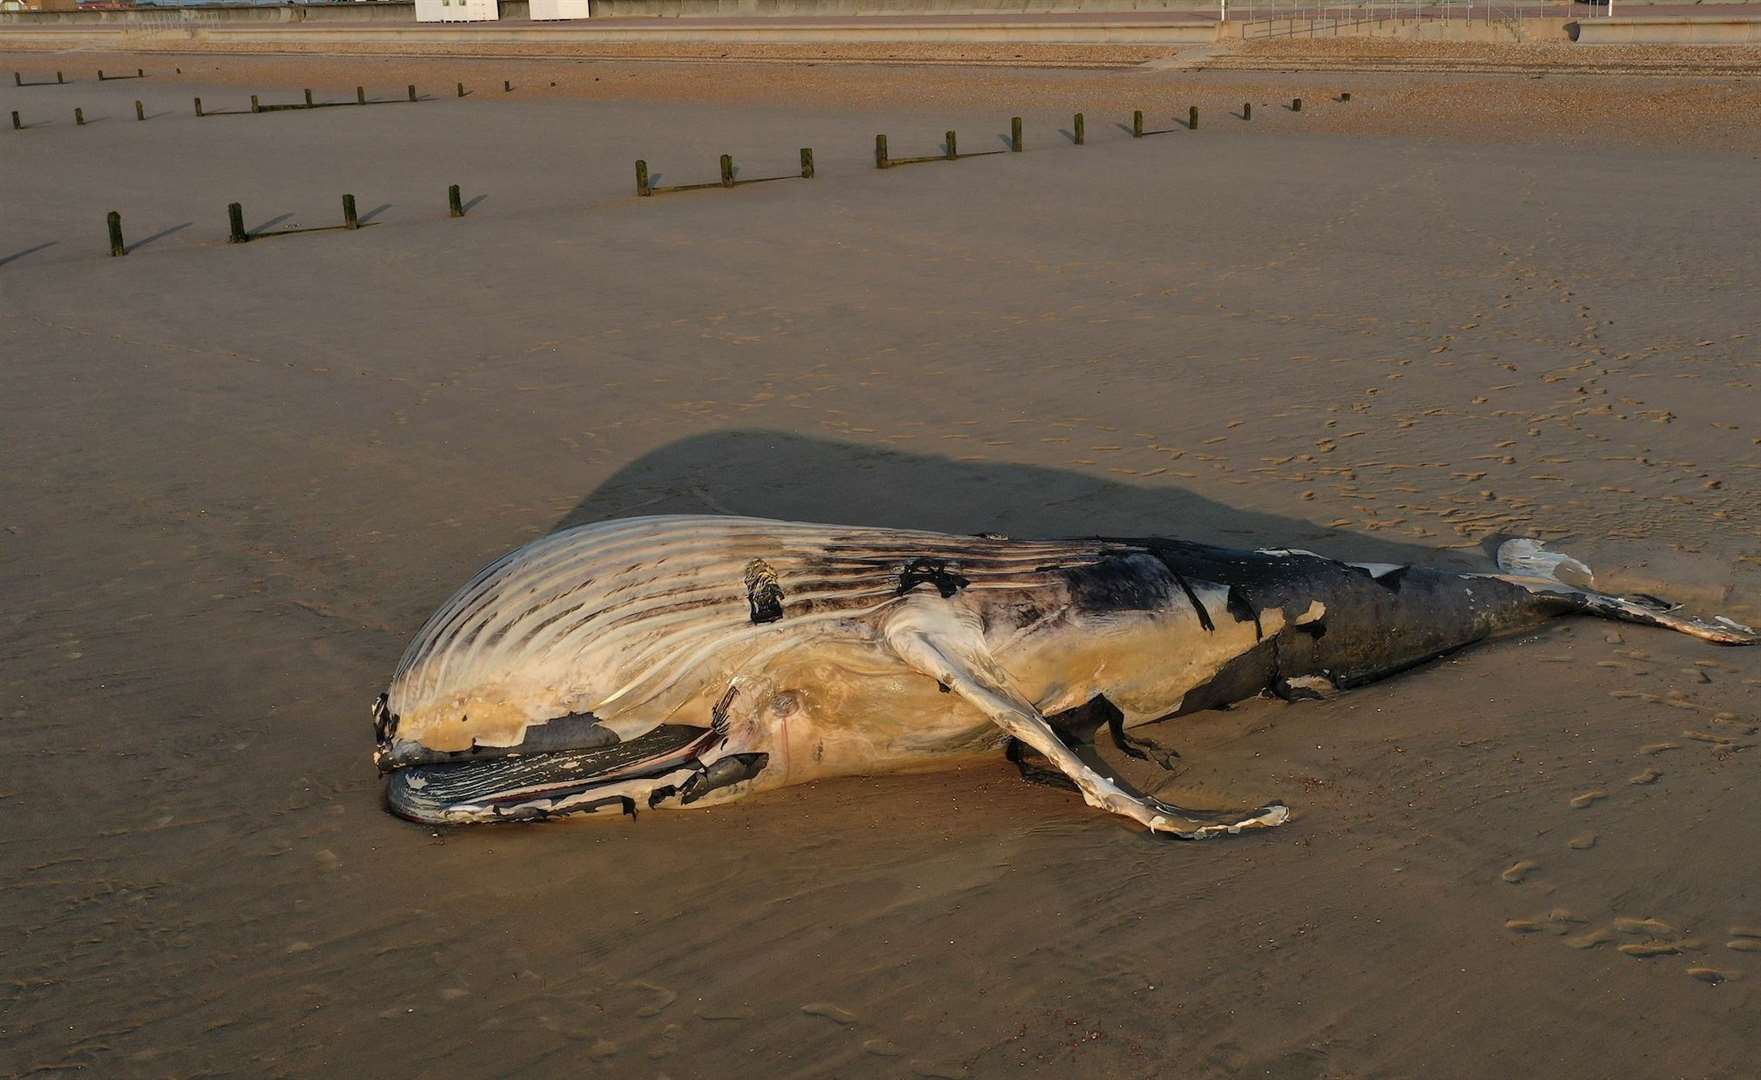 The whale washed up on St Mary’s Bay on Thursday. Picture: UKNIP